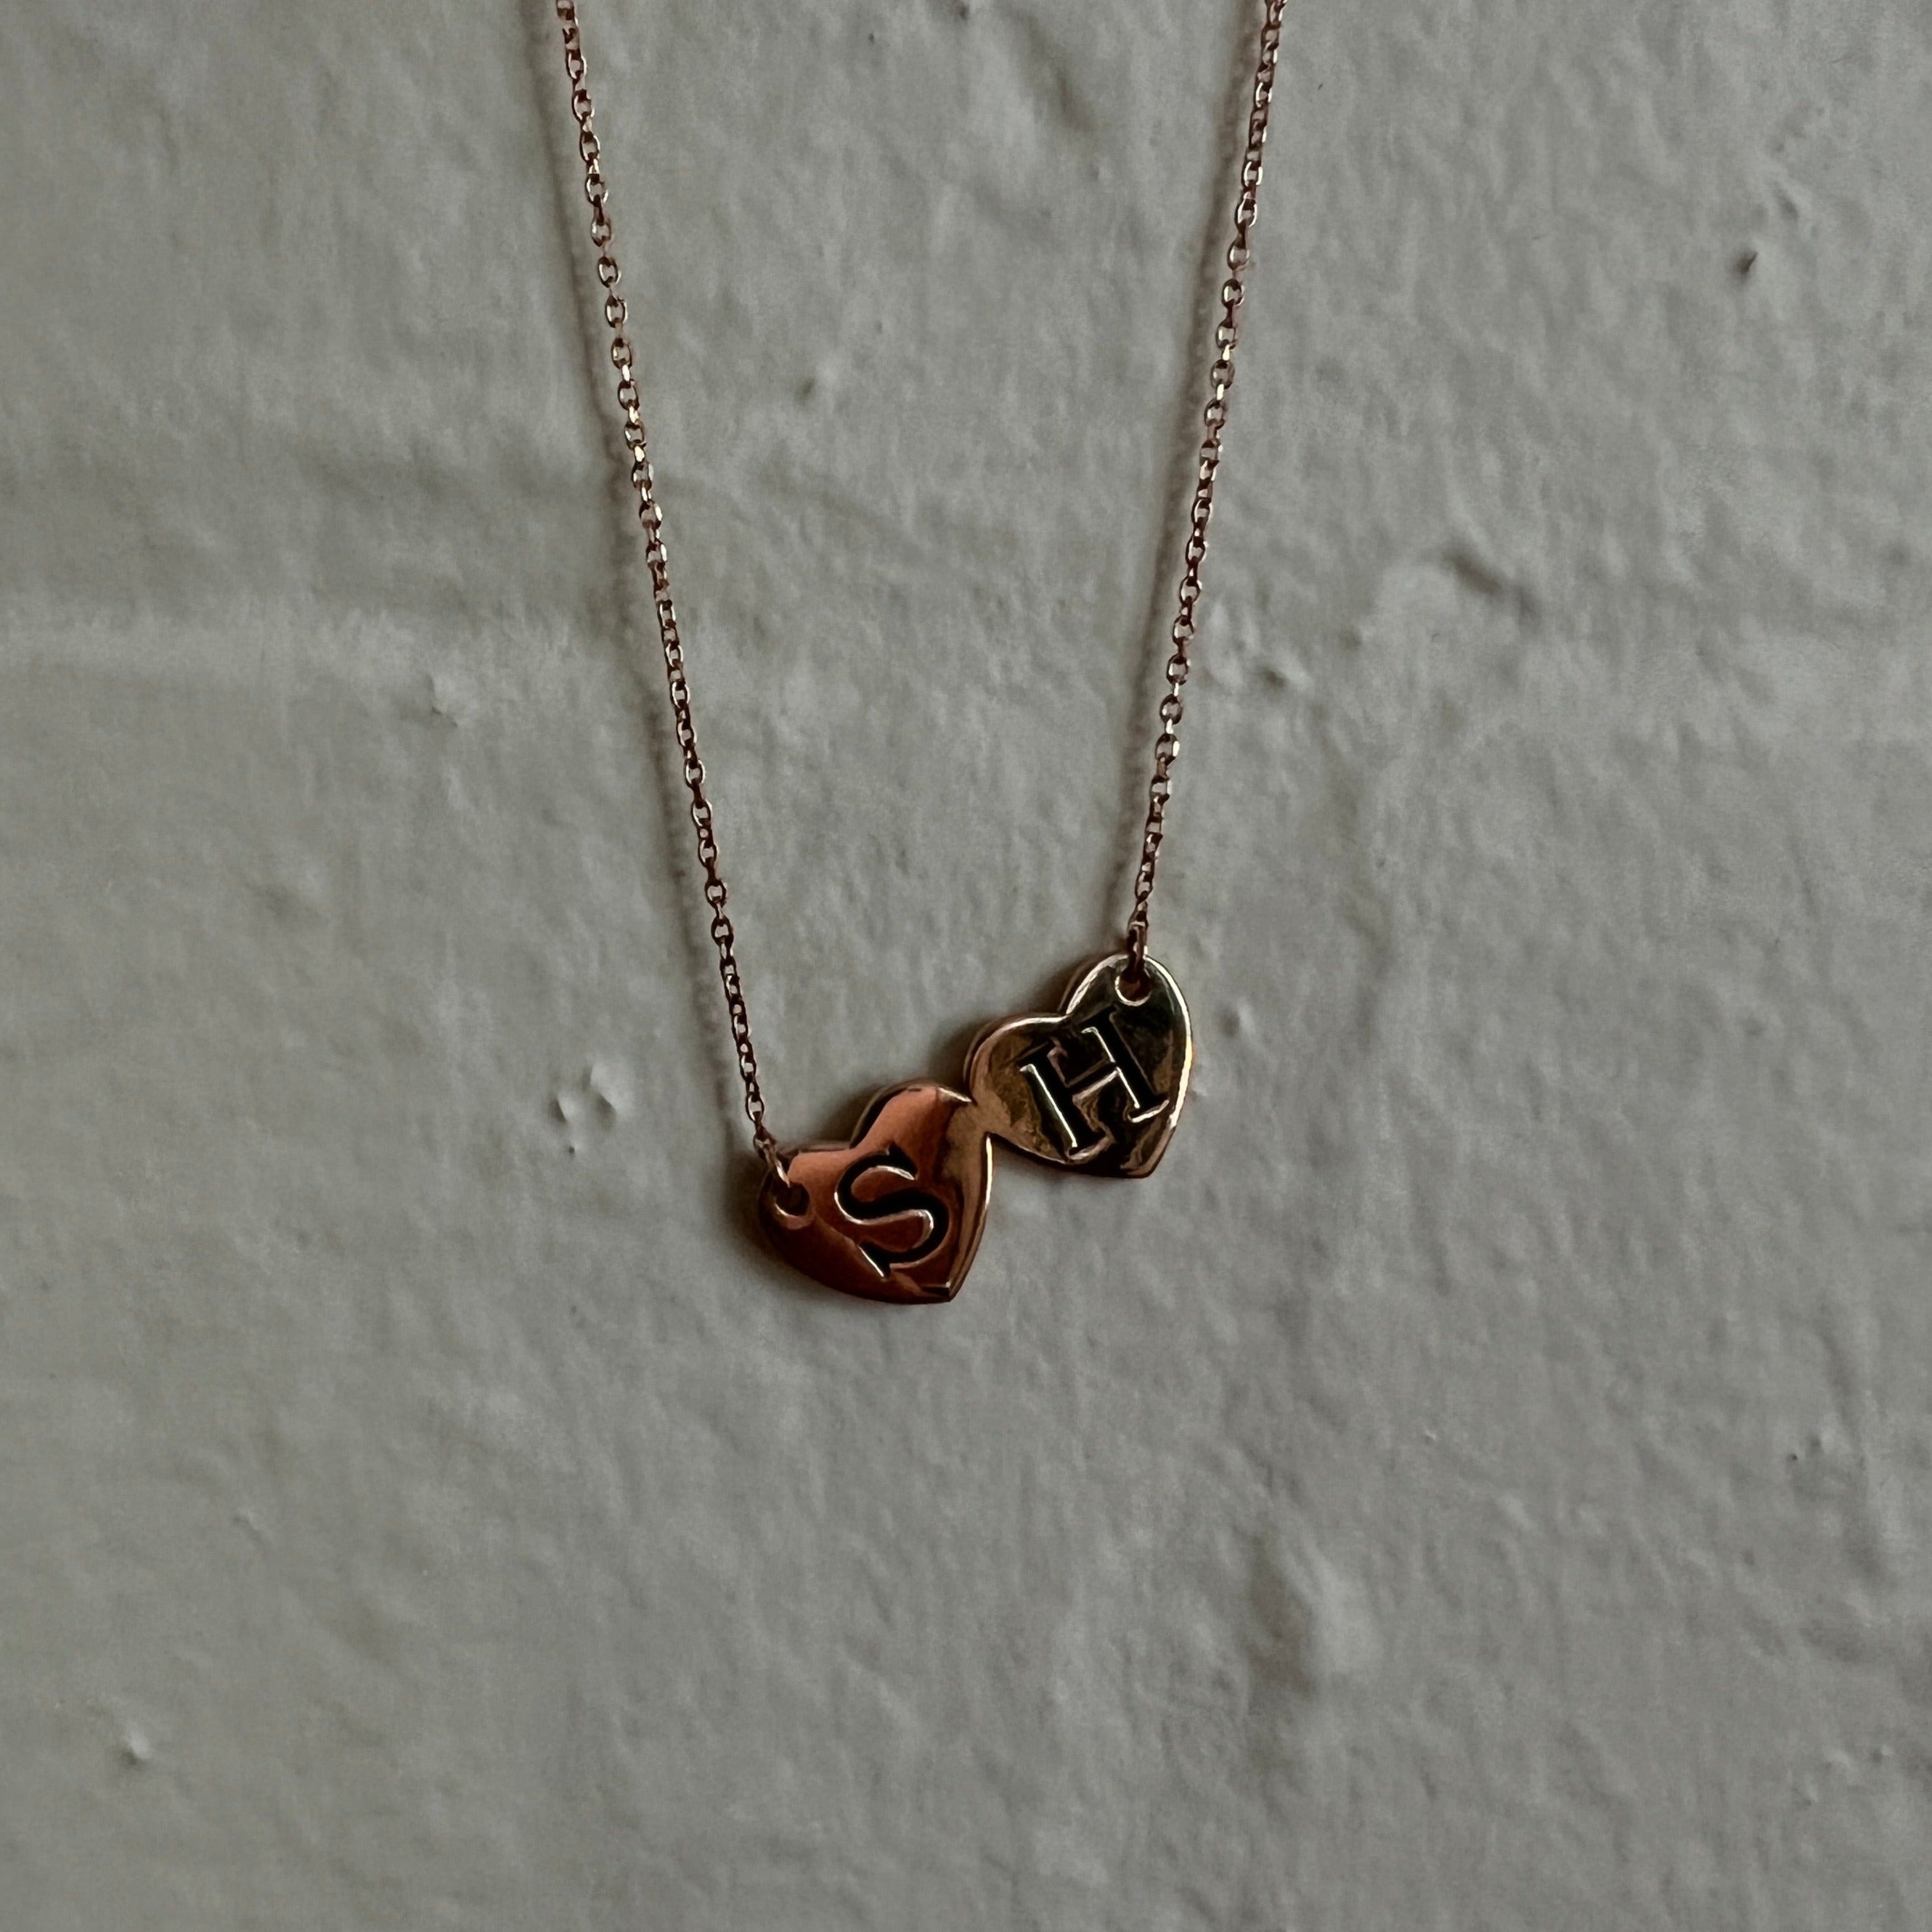 $ALE - Double Happiness Necklace Rose Gold